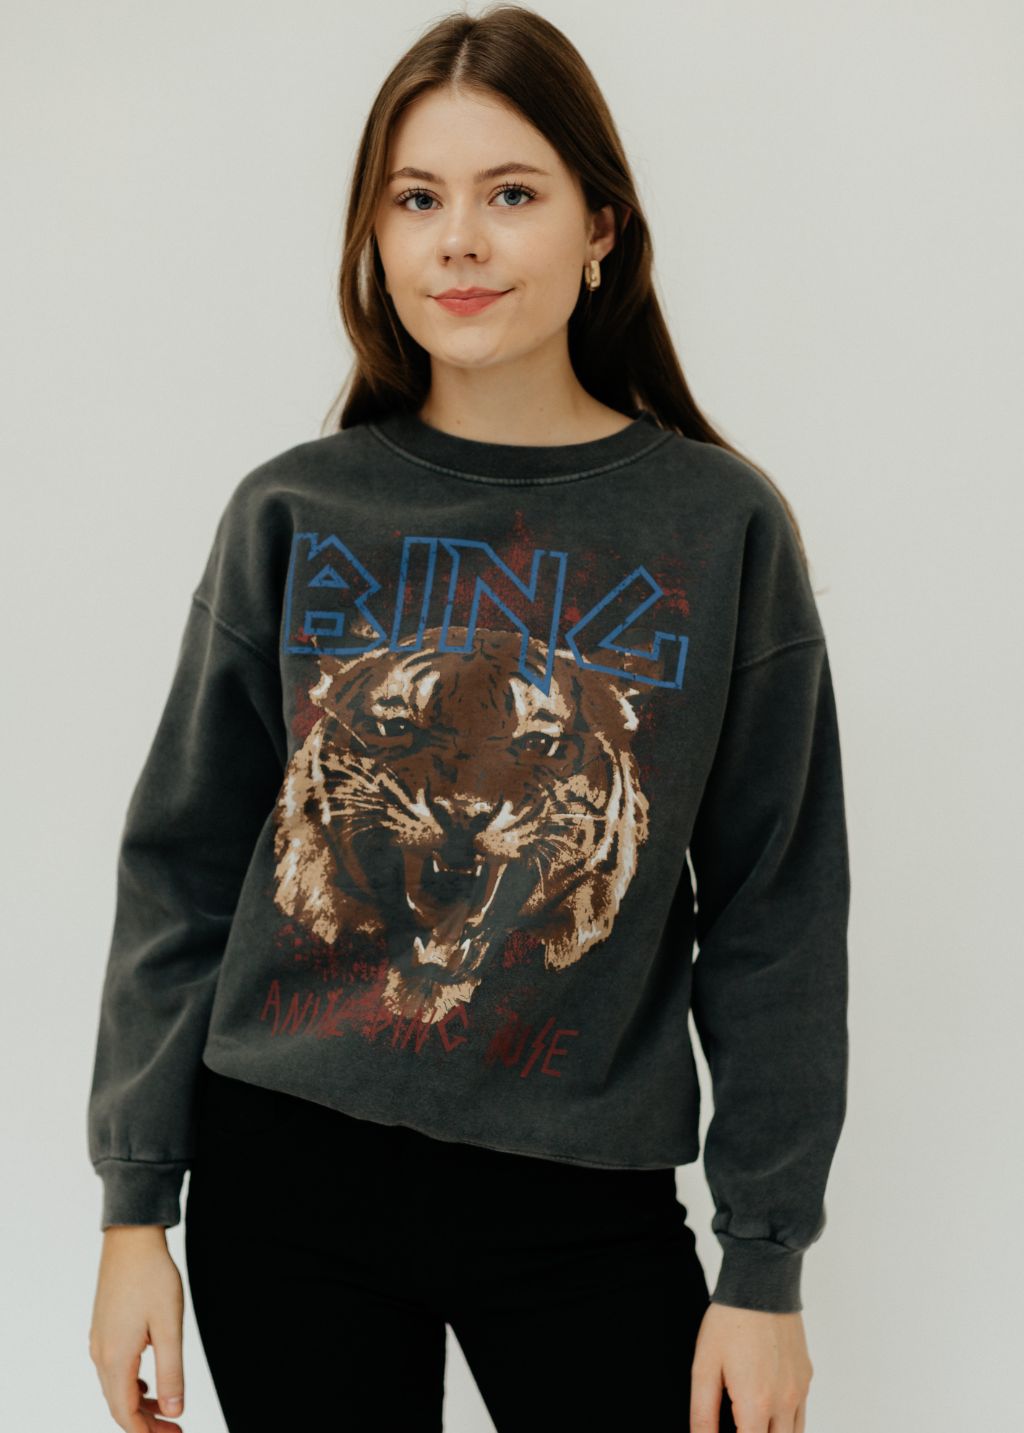 ANINE BING on Instagram: “Our Tiger Sweatshirt— a classic forever